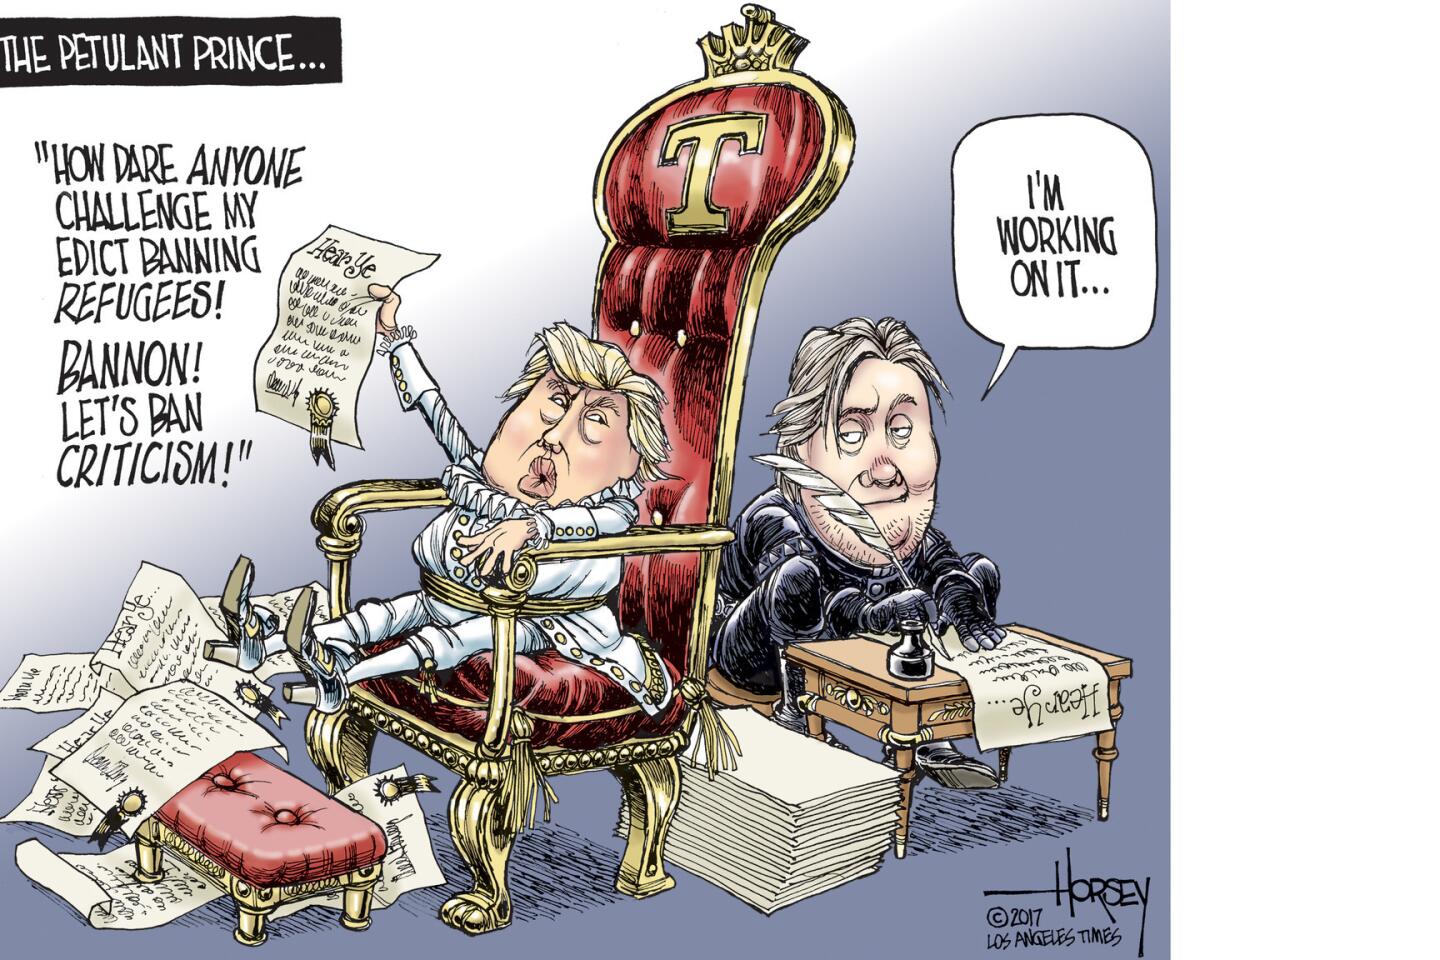 Trump and Bannon want to rule by edict, with no criticism allowed.